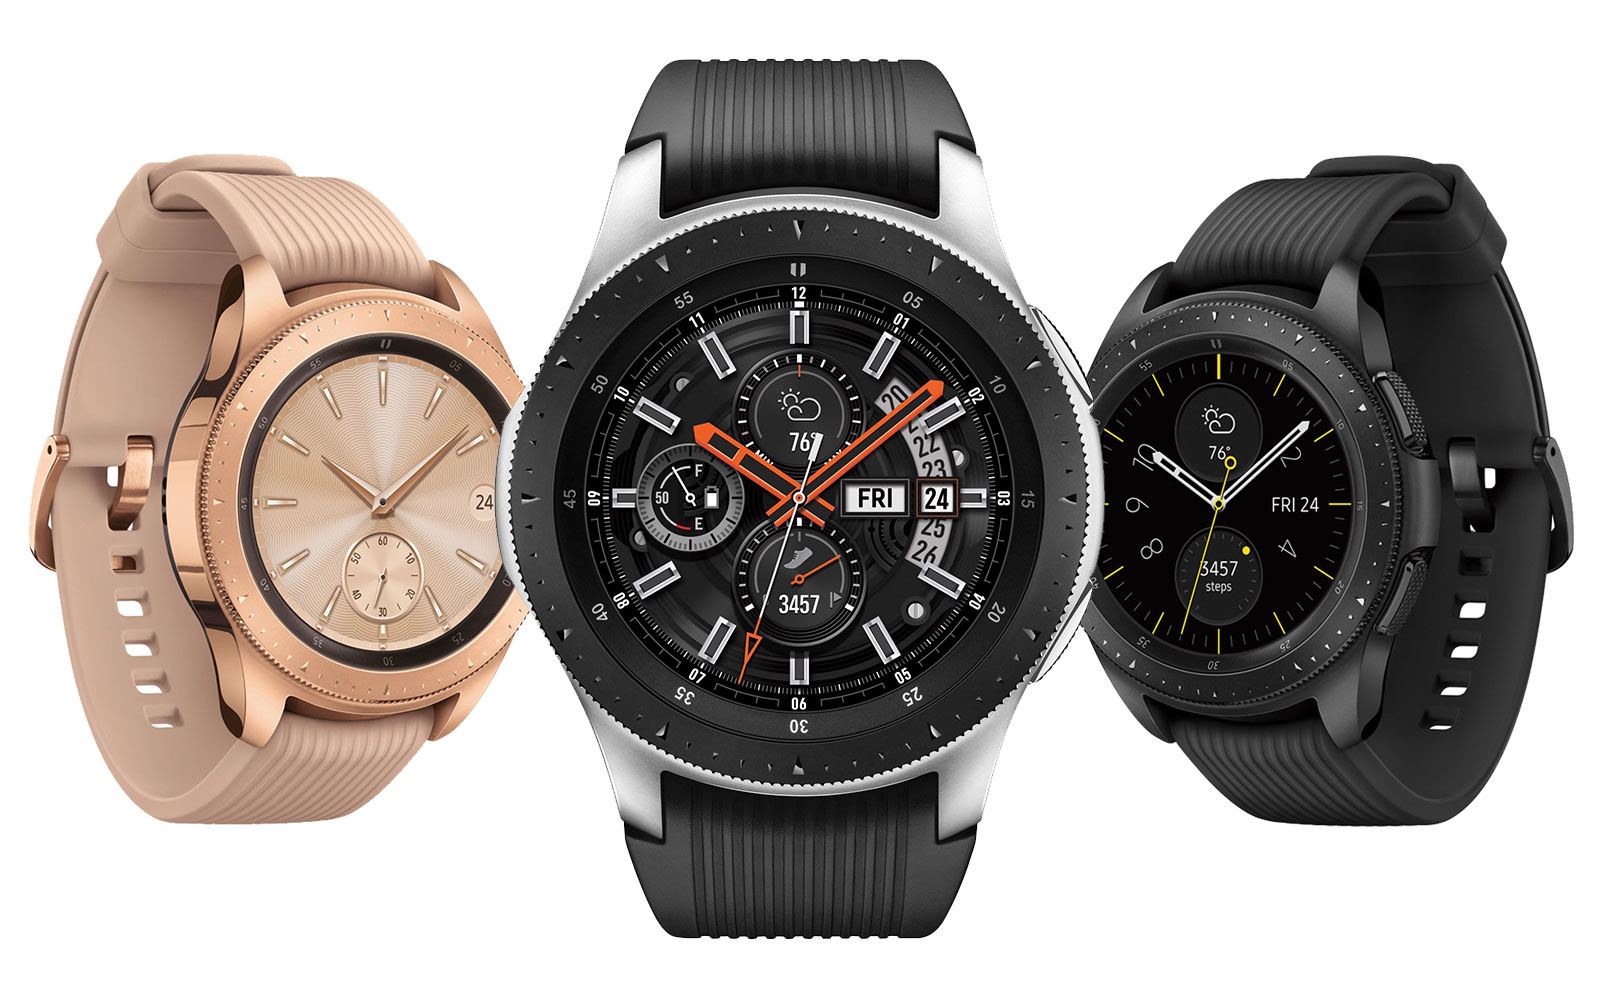 Samsung returns to the smartwatch market by introducing the LTE-powered